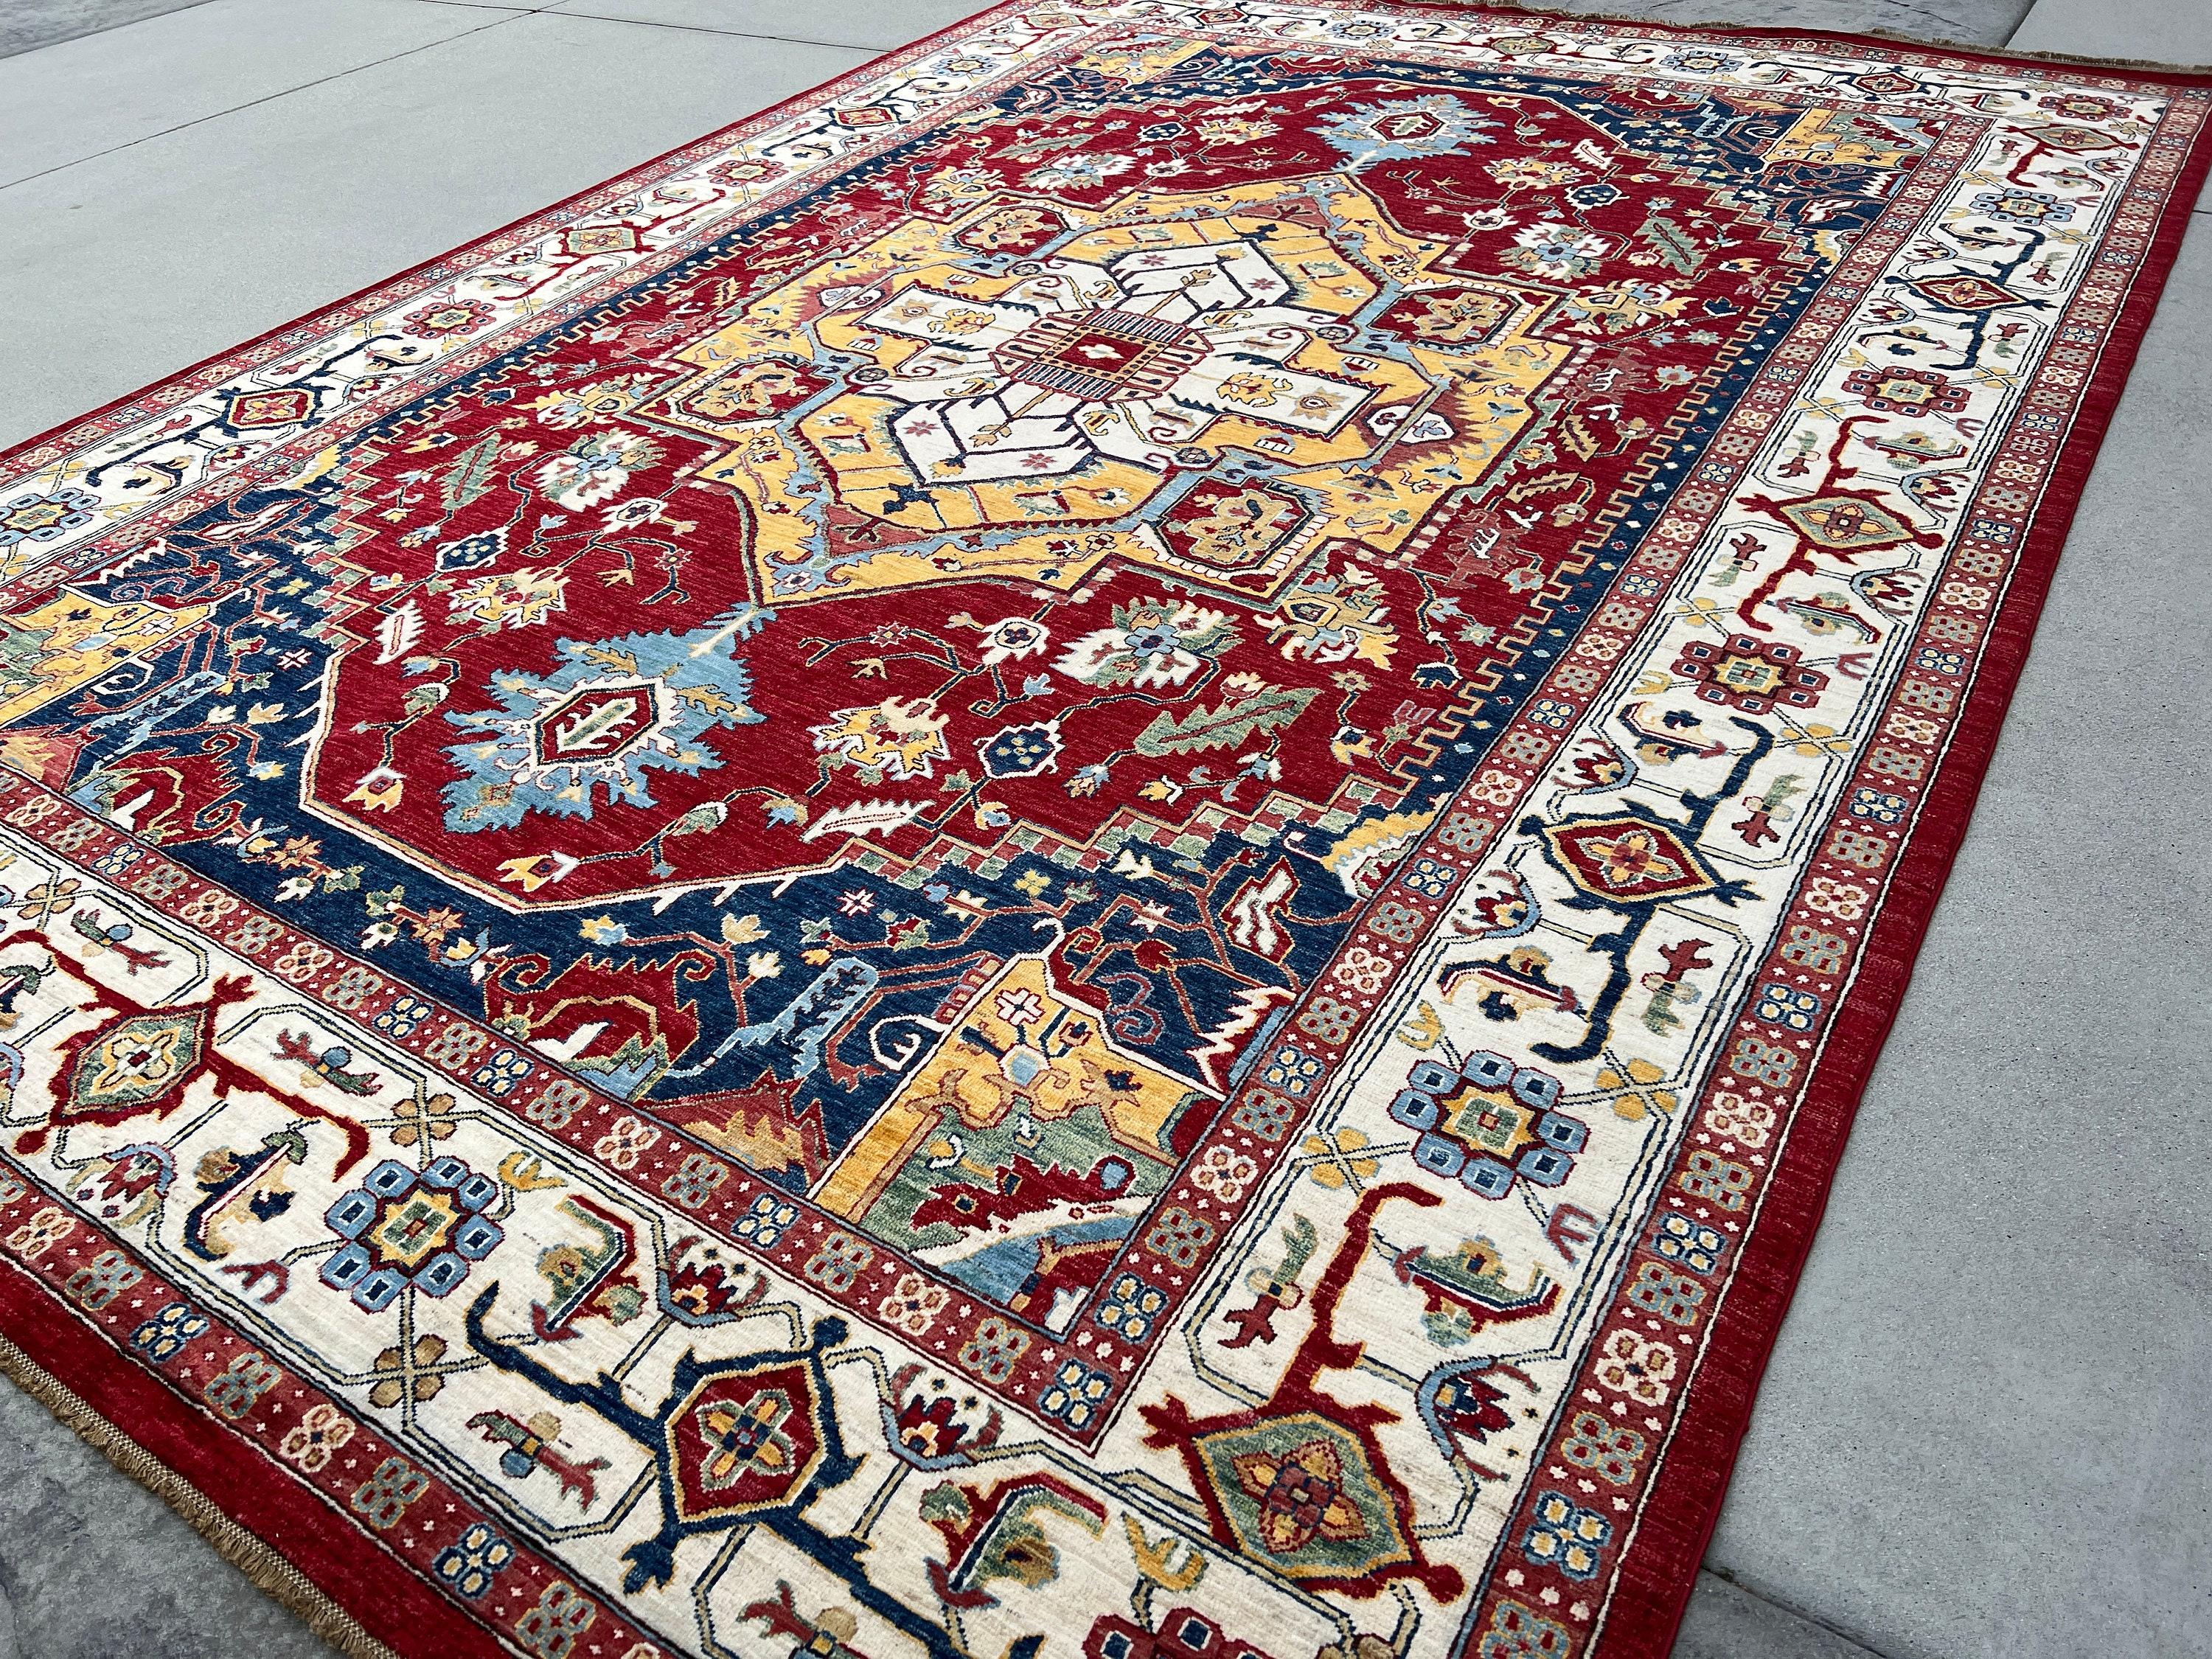 Hand-Knotted Afghan Heriz Rug Premium Hand-Spun Afghan Wool Fair Trade In New Condition For Sale In San Marcos, CA